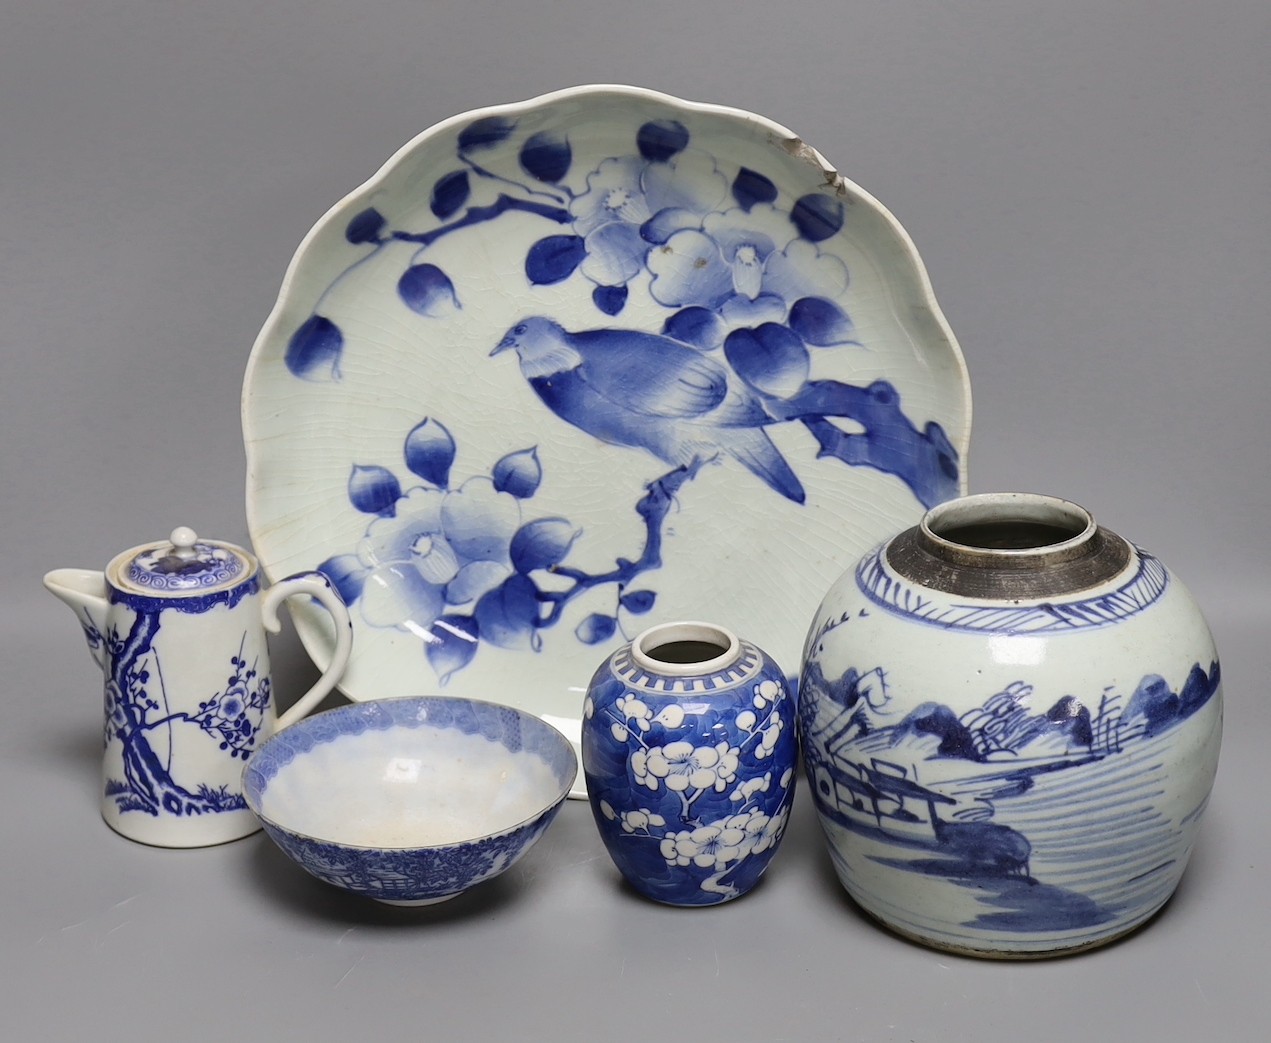 A Japanese Edo period blue and white dish, a Chinese Prunus blossom jar, late 19th century, a provincial blue and white jar and other items, dish 31 cms diameter